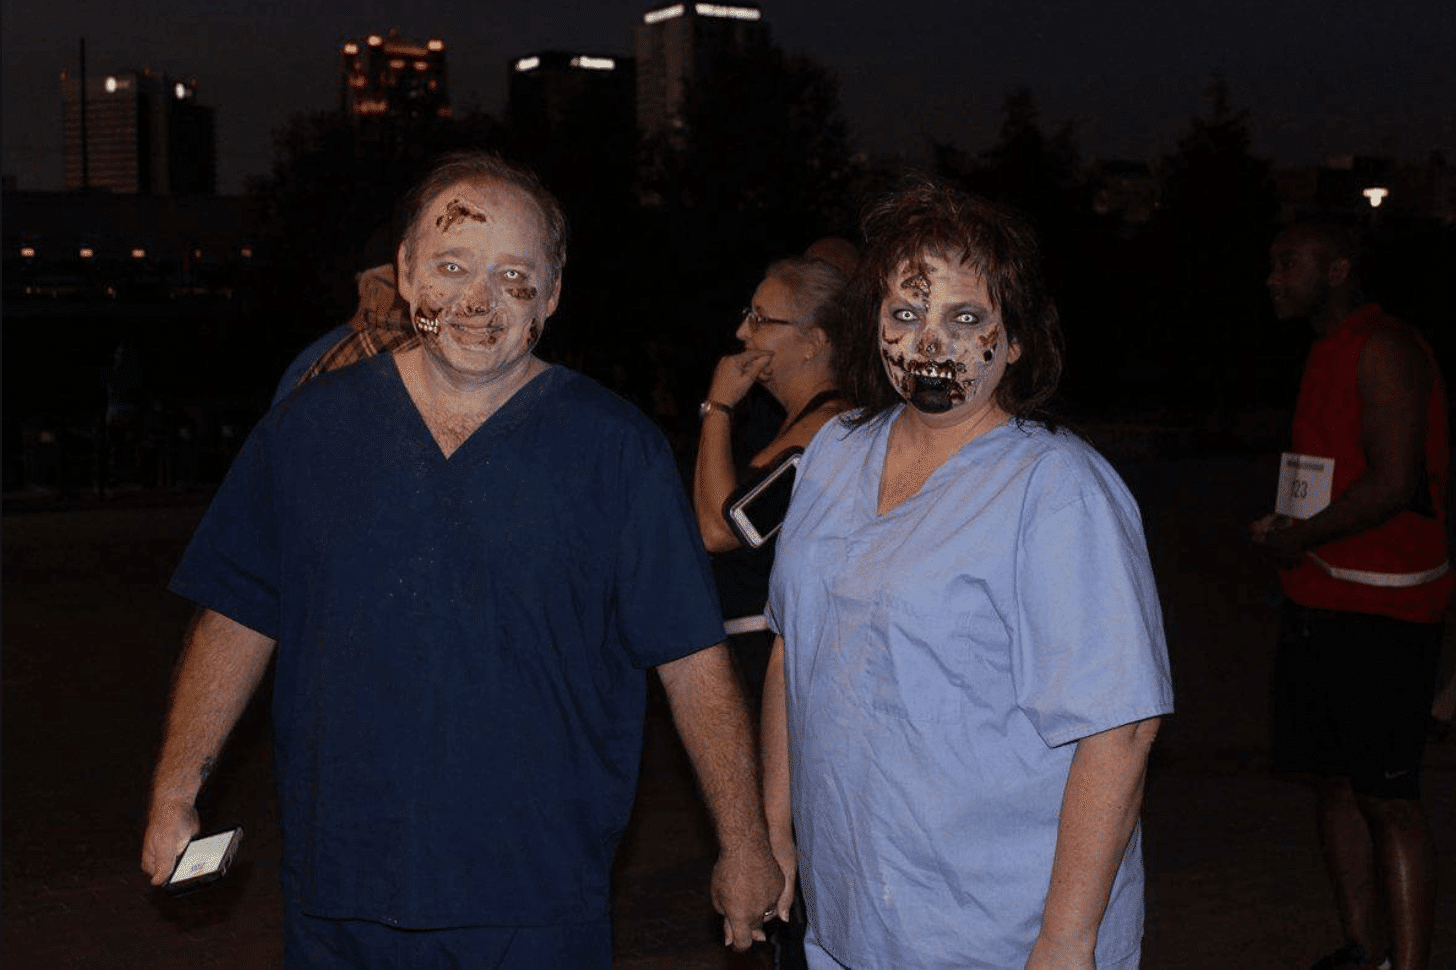 Zombie Run A guide to 10 fall runs in Birmingham, including the Zombie Night Run on Oct. 27